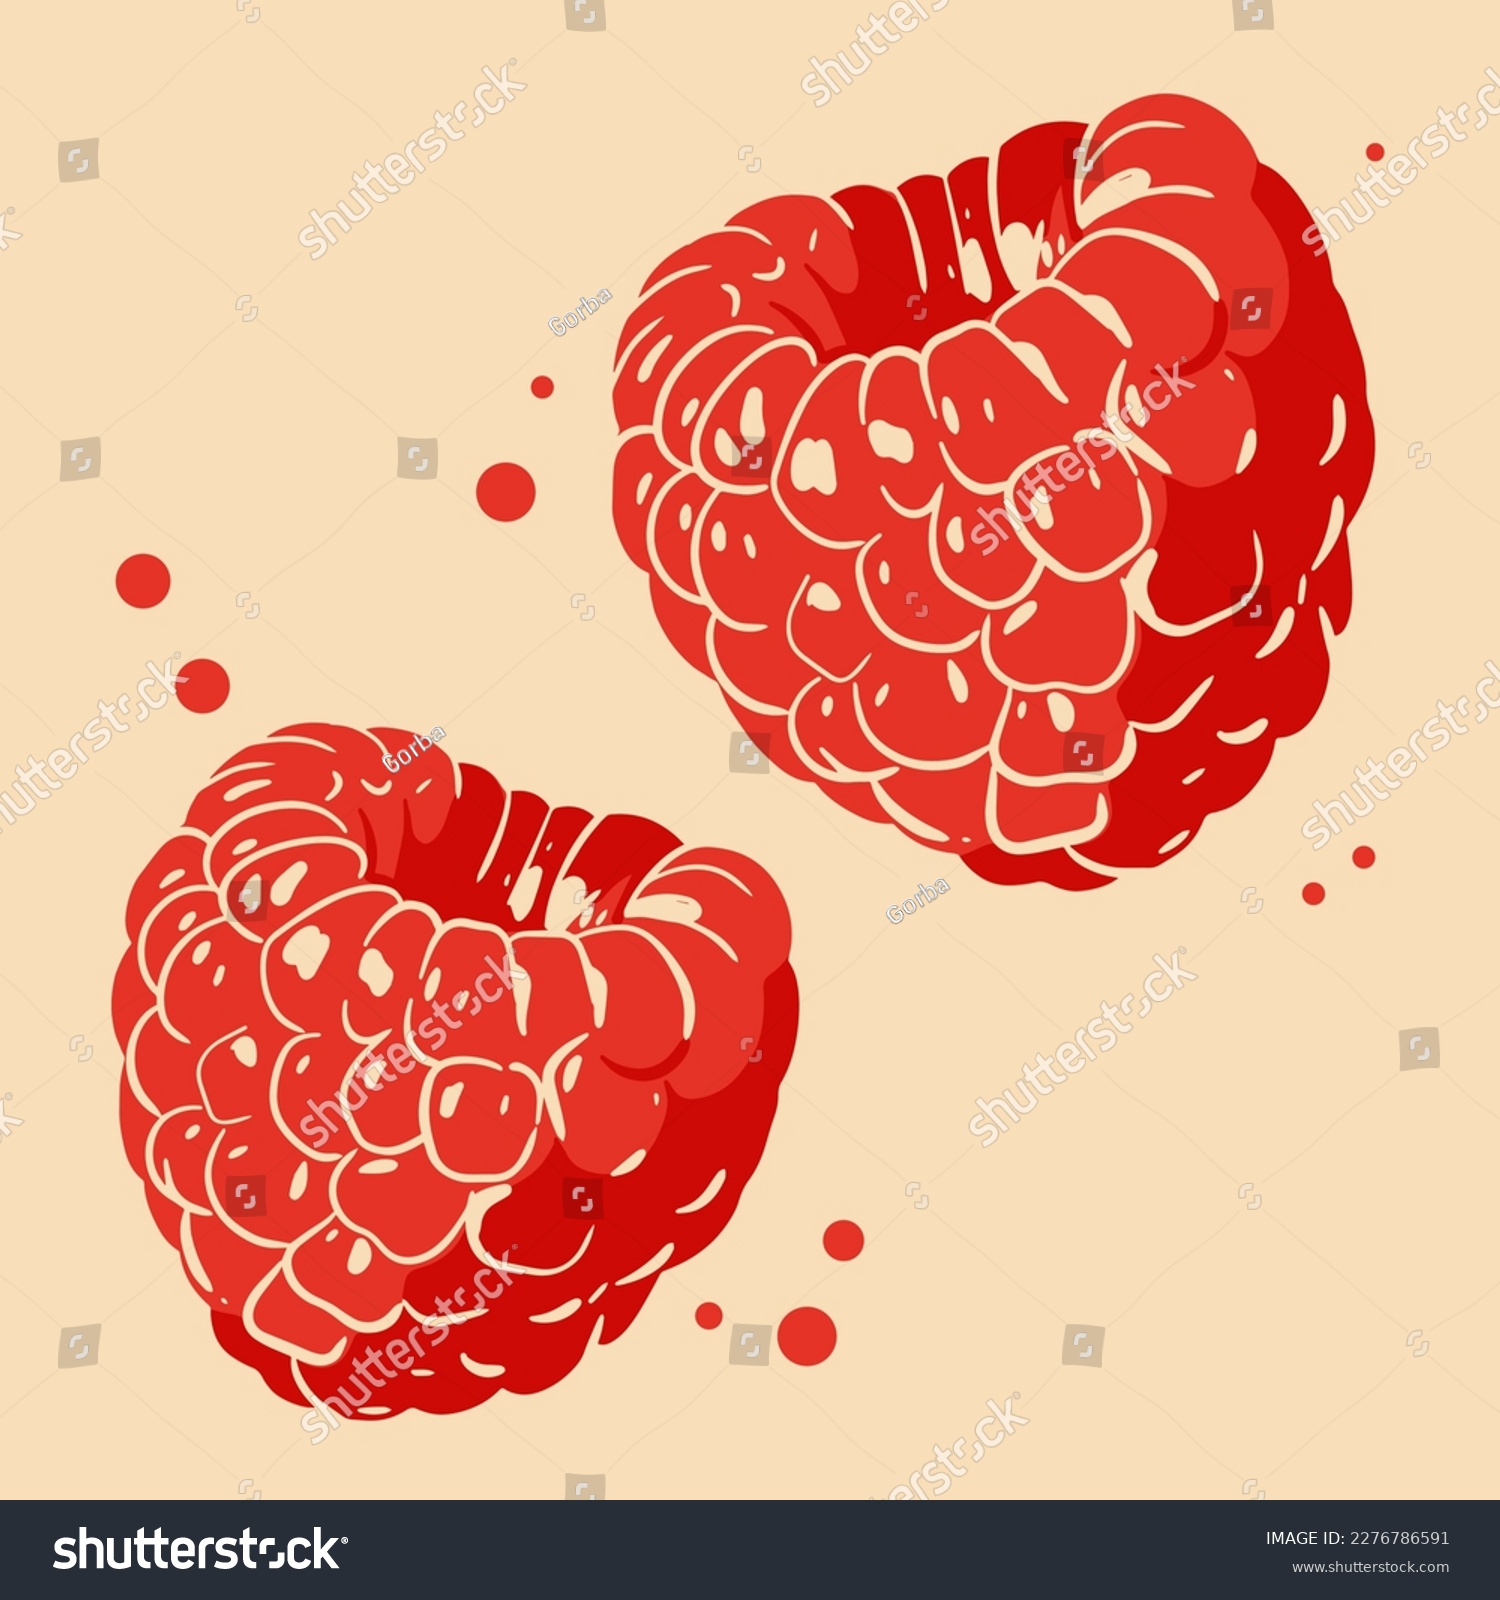 Colored vector illustration of  raspberry. For cosmetic package design, medicinal herb, treating, half care, prints. Design element  for fabric, textile, clothing, wrapping paper, wallpaper #2276786591